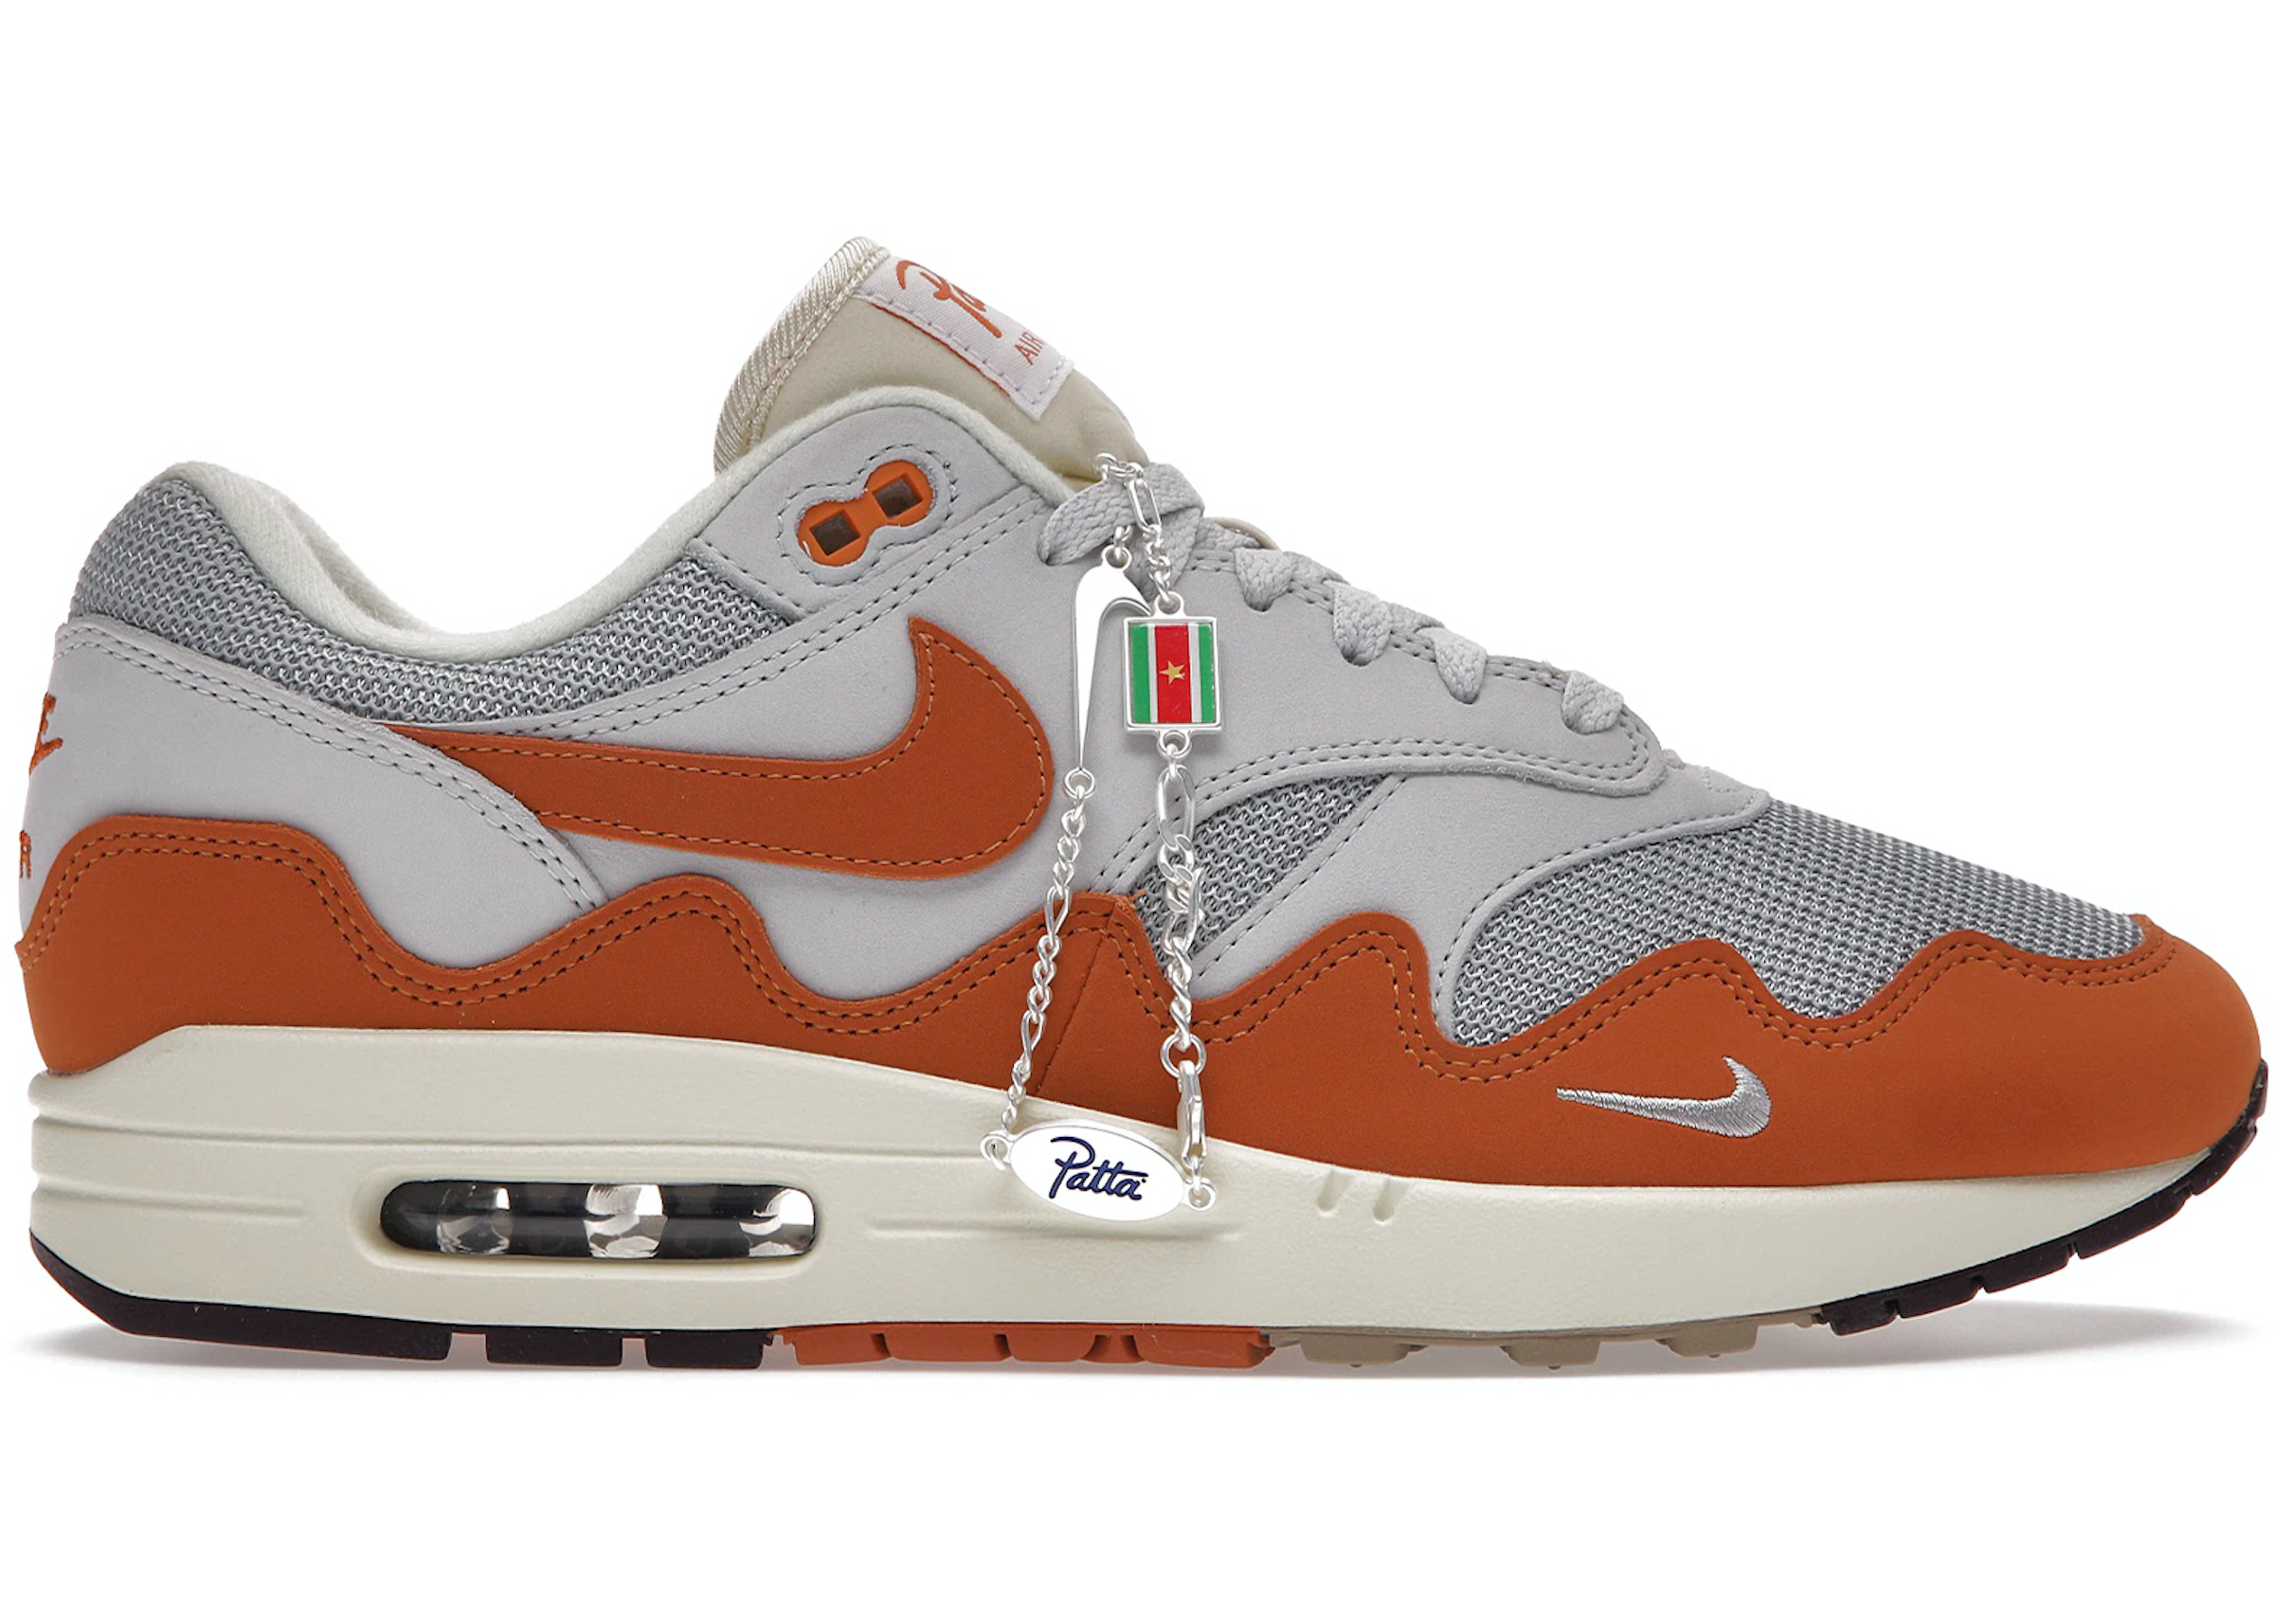 Awkward Homeless Penetrate Nike Air Max 1 Patta Waves Monarch (with Bracelet) - DH1348-001 - US